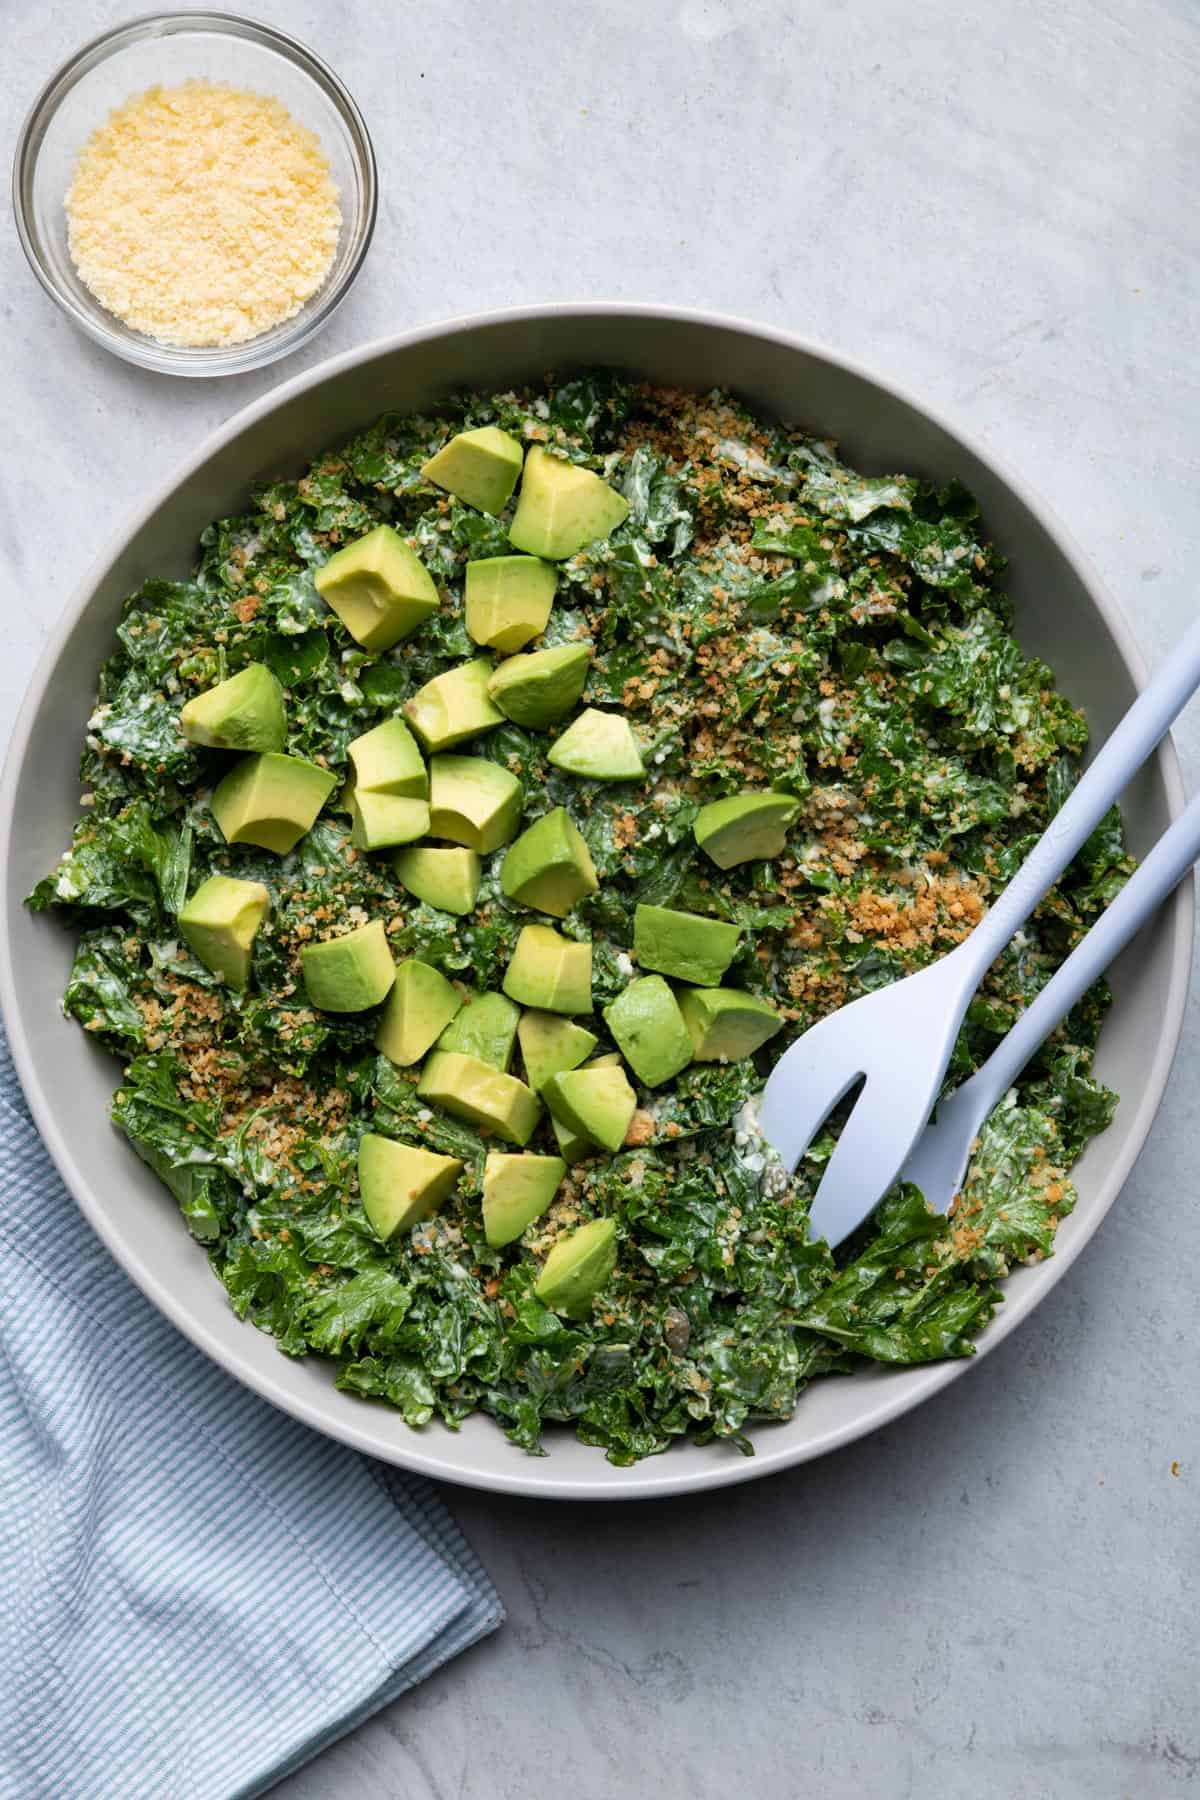 Large serving bowl of kale caesar salad topped with garlic breadcrumbs and avocados